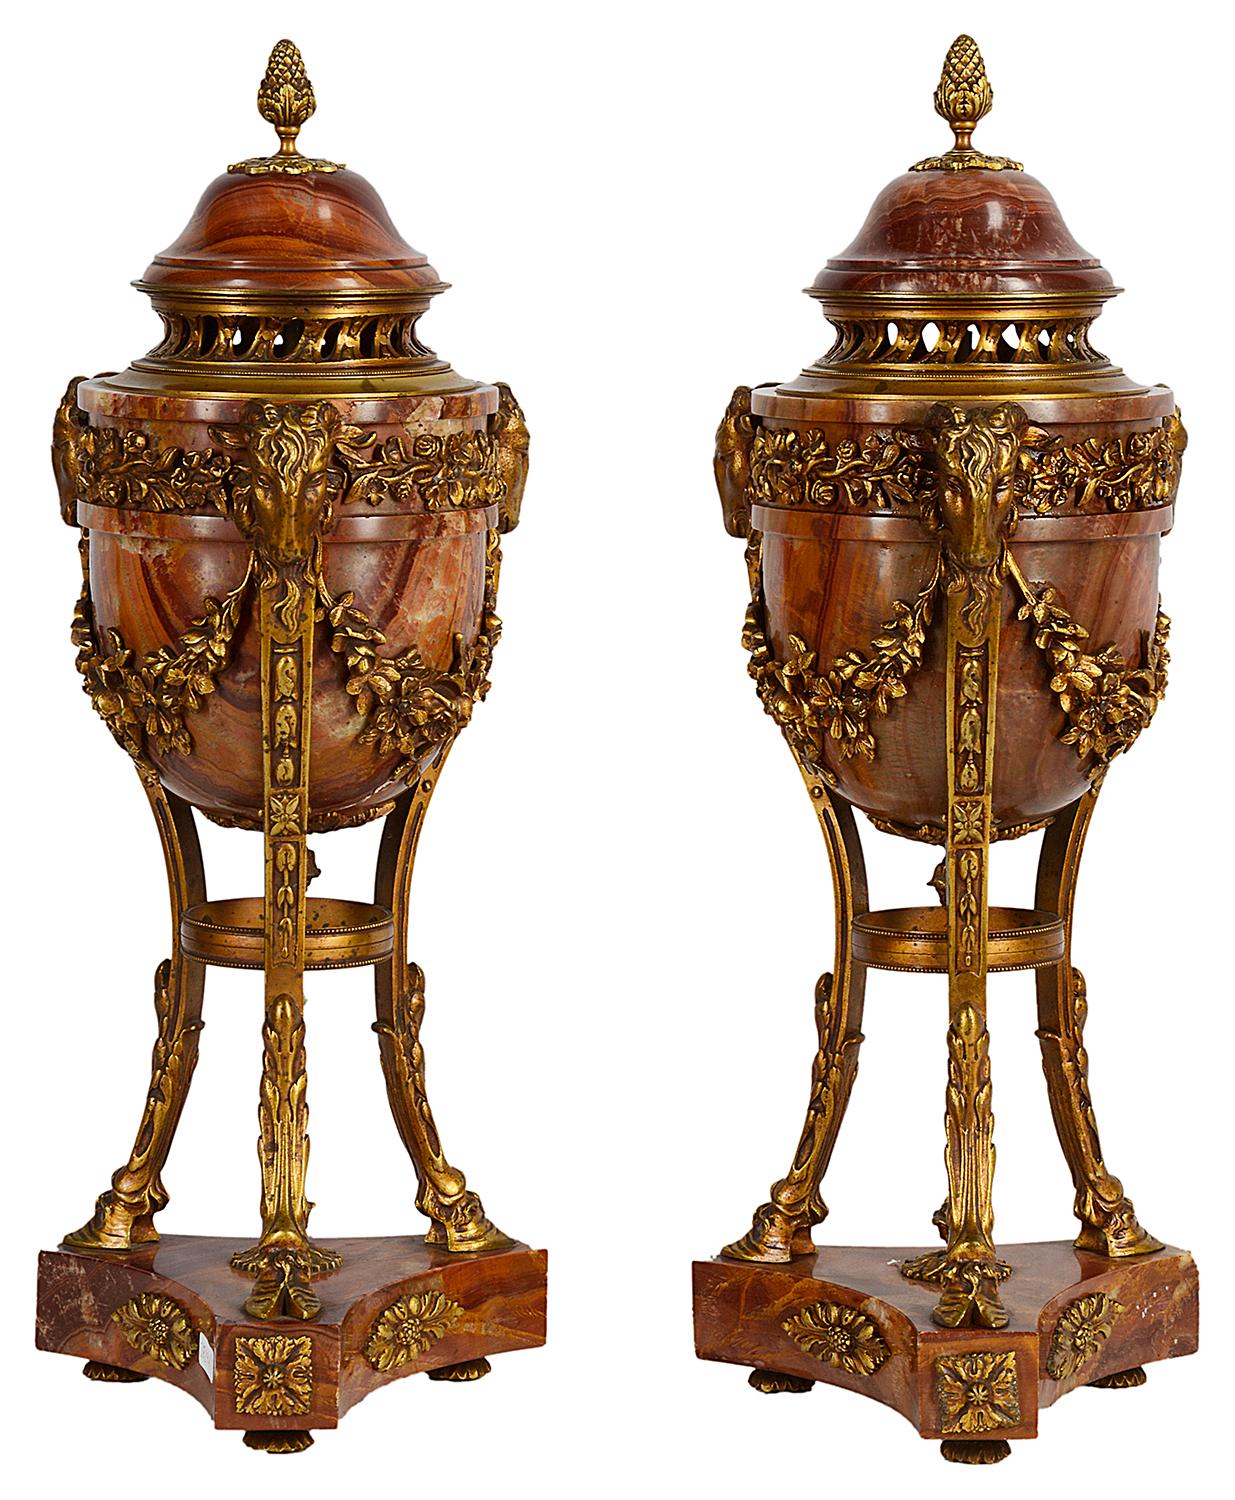 A good quality pair of late 19th century French marble and gilded ormolu urns, each with classical Rans head mounts, supported by three out-swept supports, terminating in hoof feet and raised on a marble plinths.